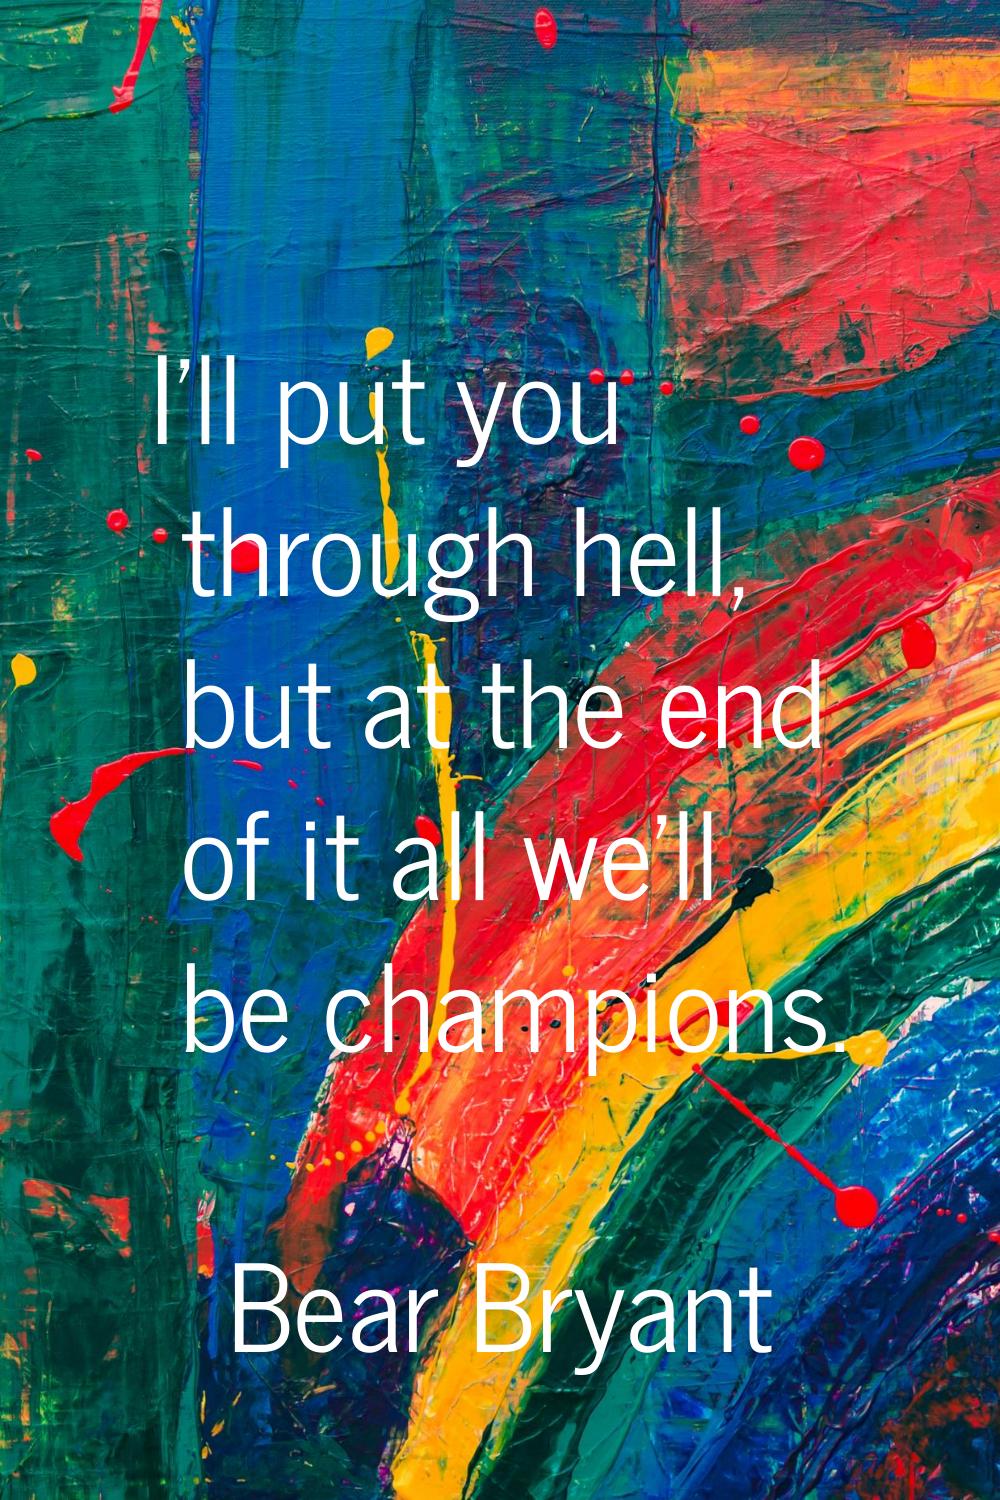 I'll put you through hell, but at the end of it all we'll be champions.